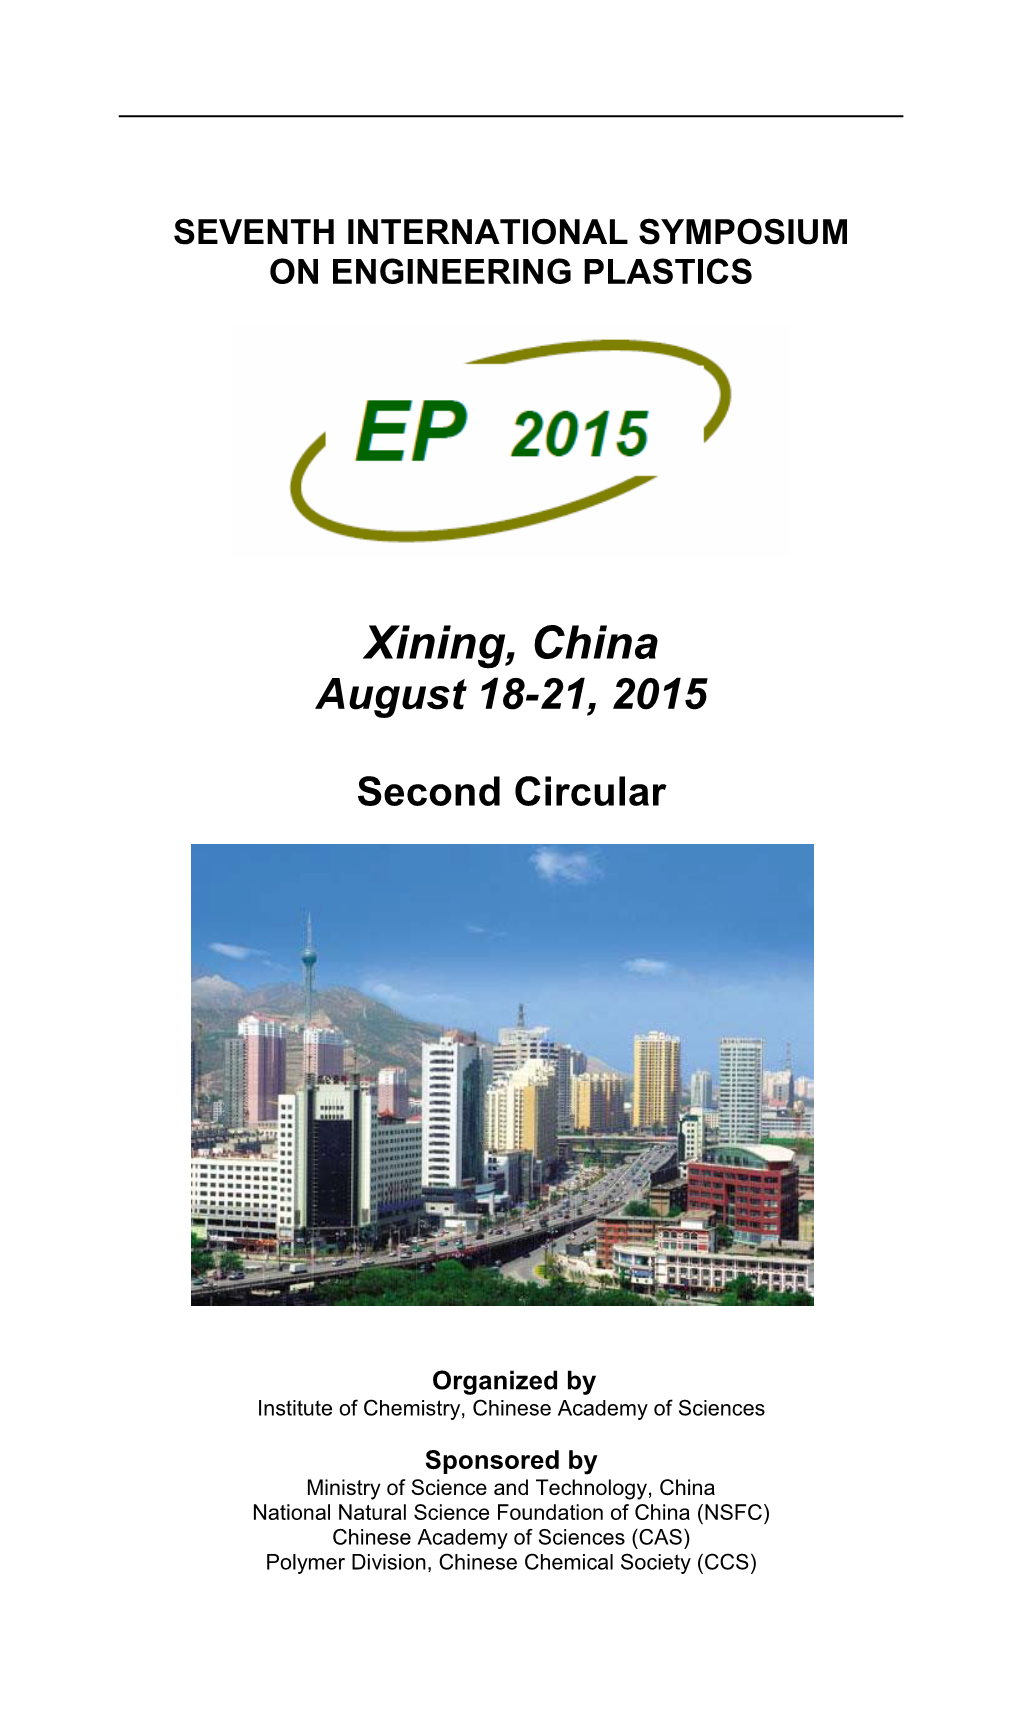 Xining, China August 18-21, 2015